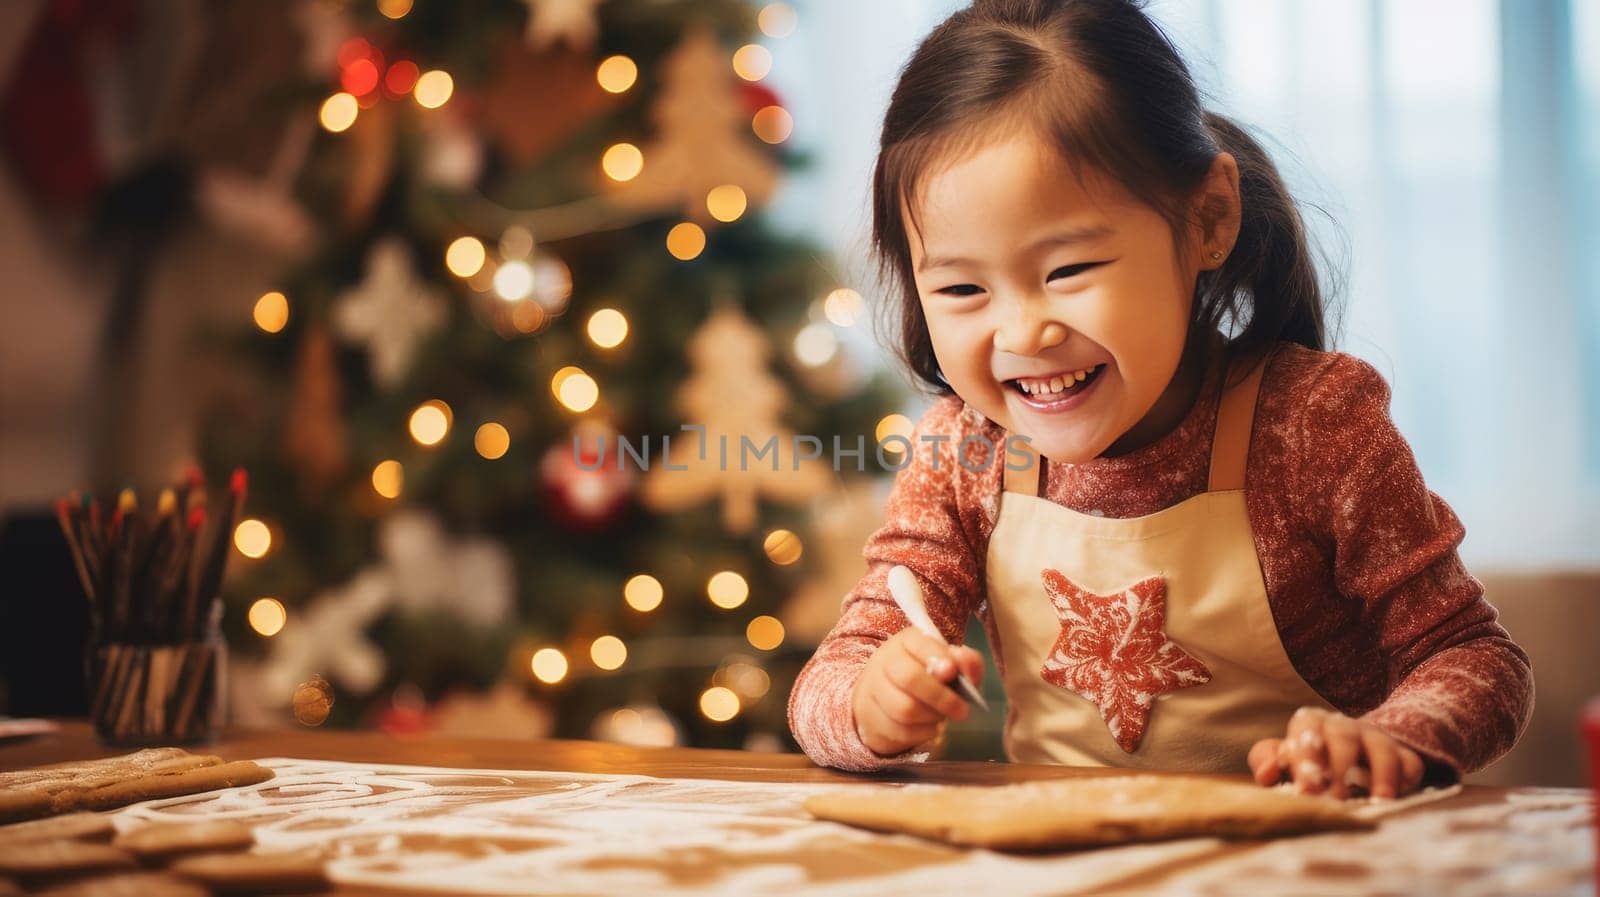 Smiling asian child with down syndrome decorates christmas cookies. Merry Christmas and Happy New Year concept